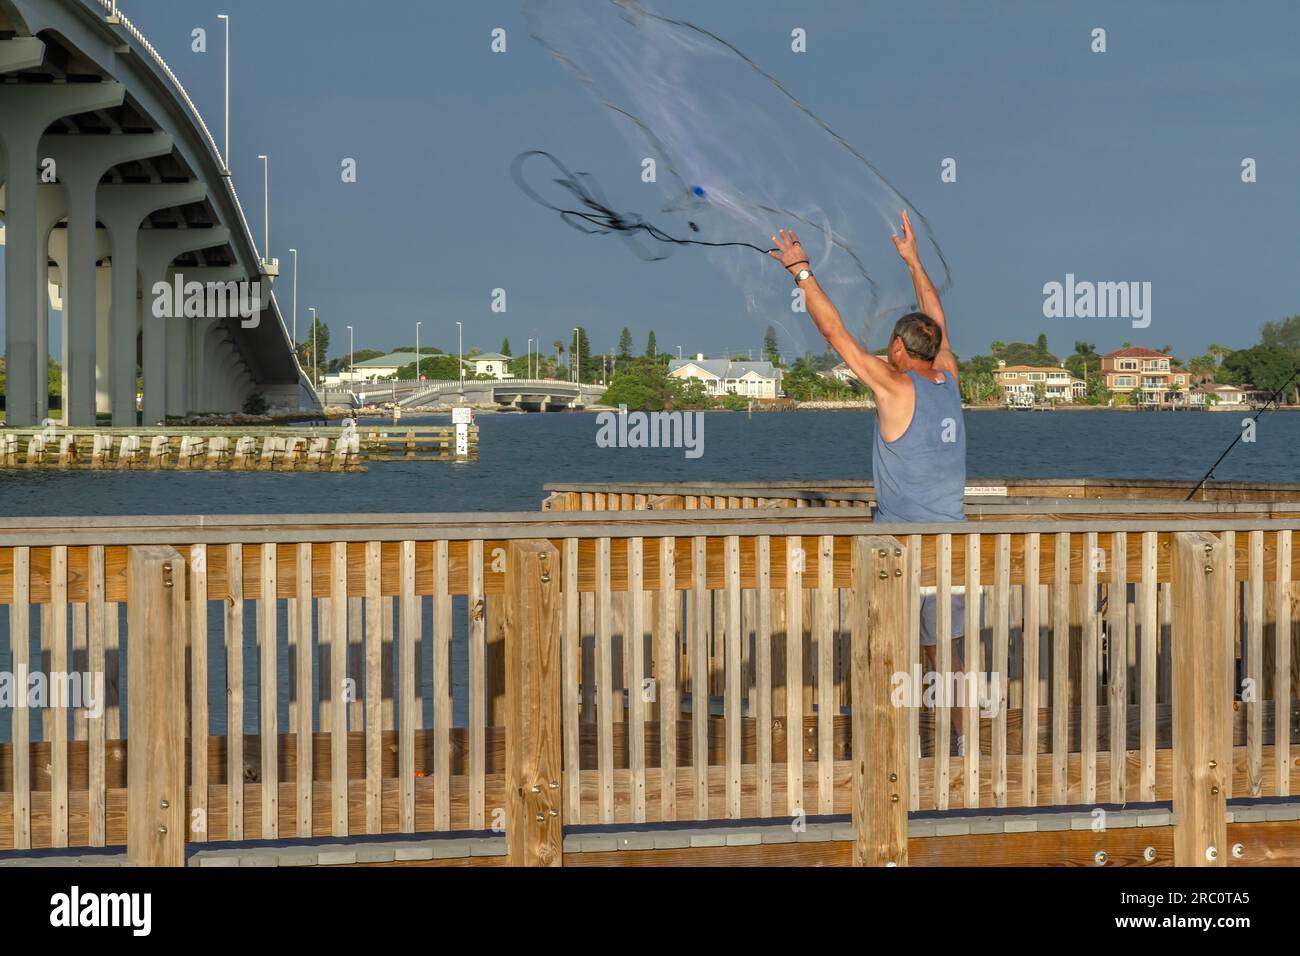 Single adult male cast net fishing off a river pier in the Tampa, Florida area. Man has just released the net. Stock Photo